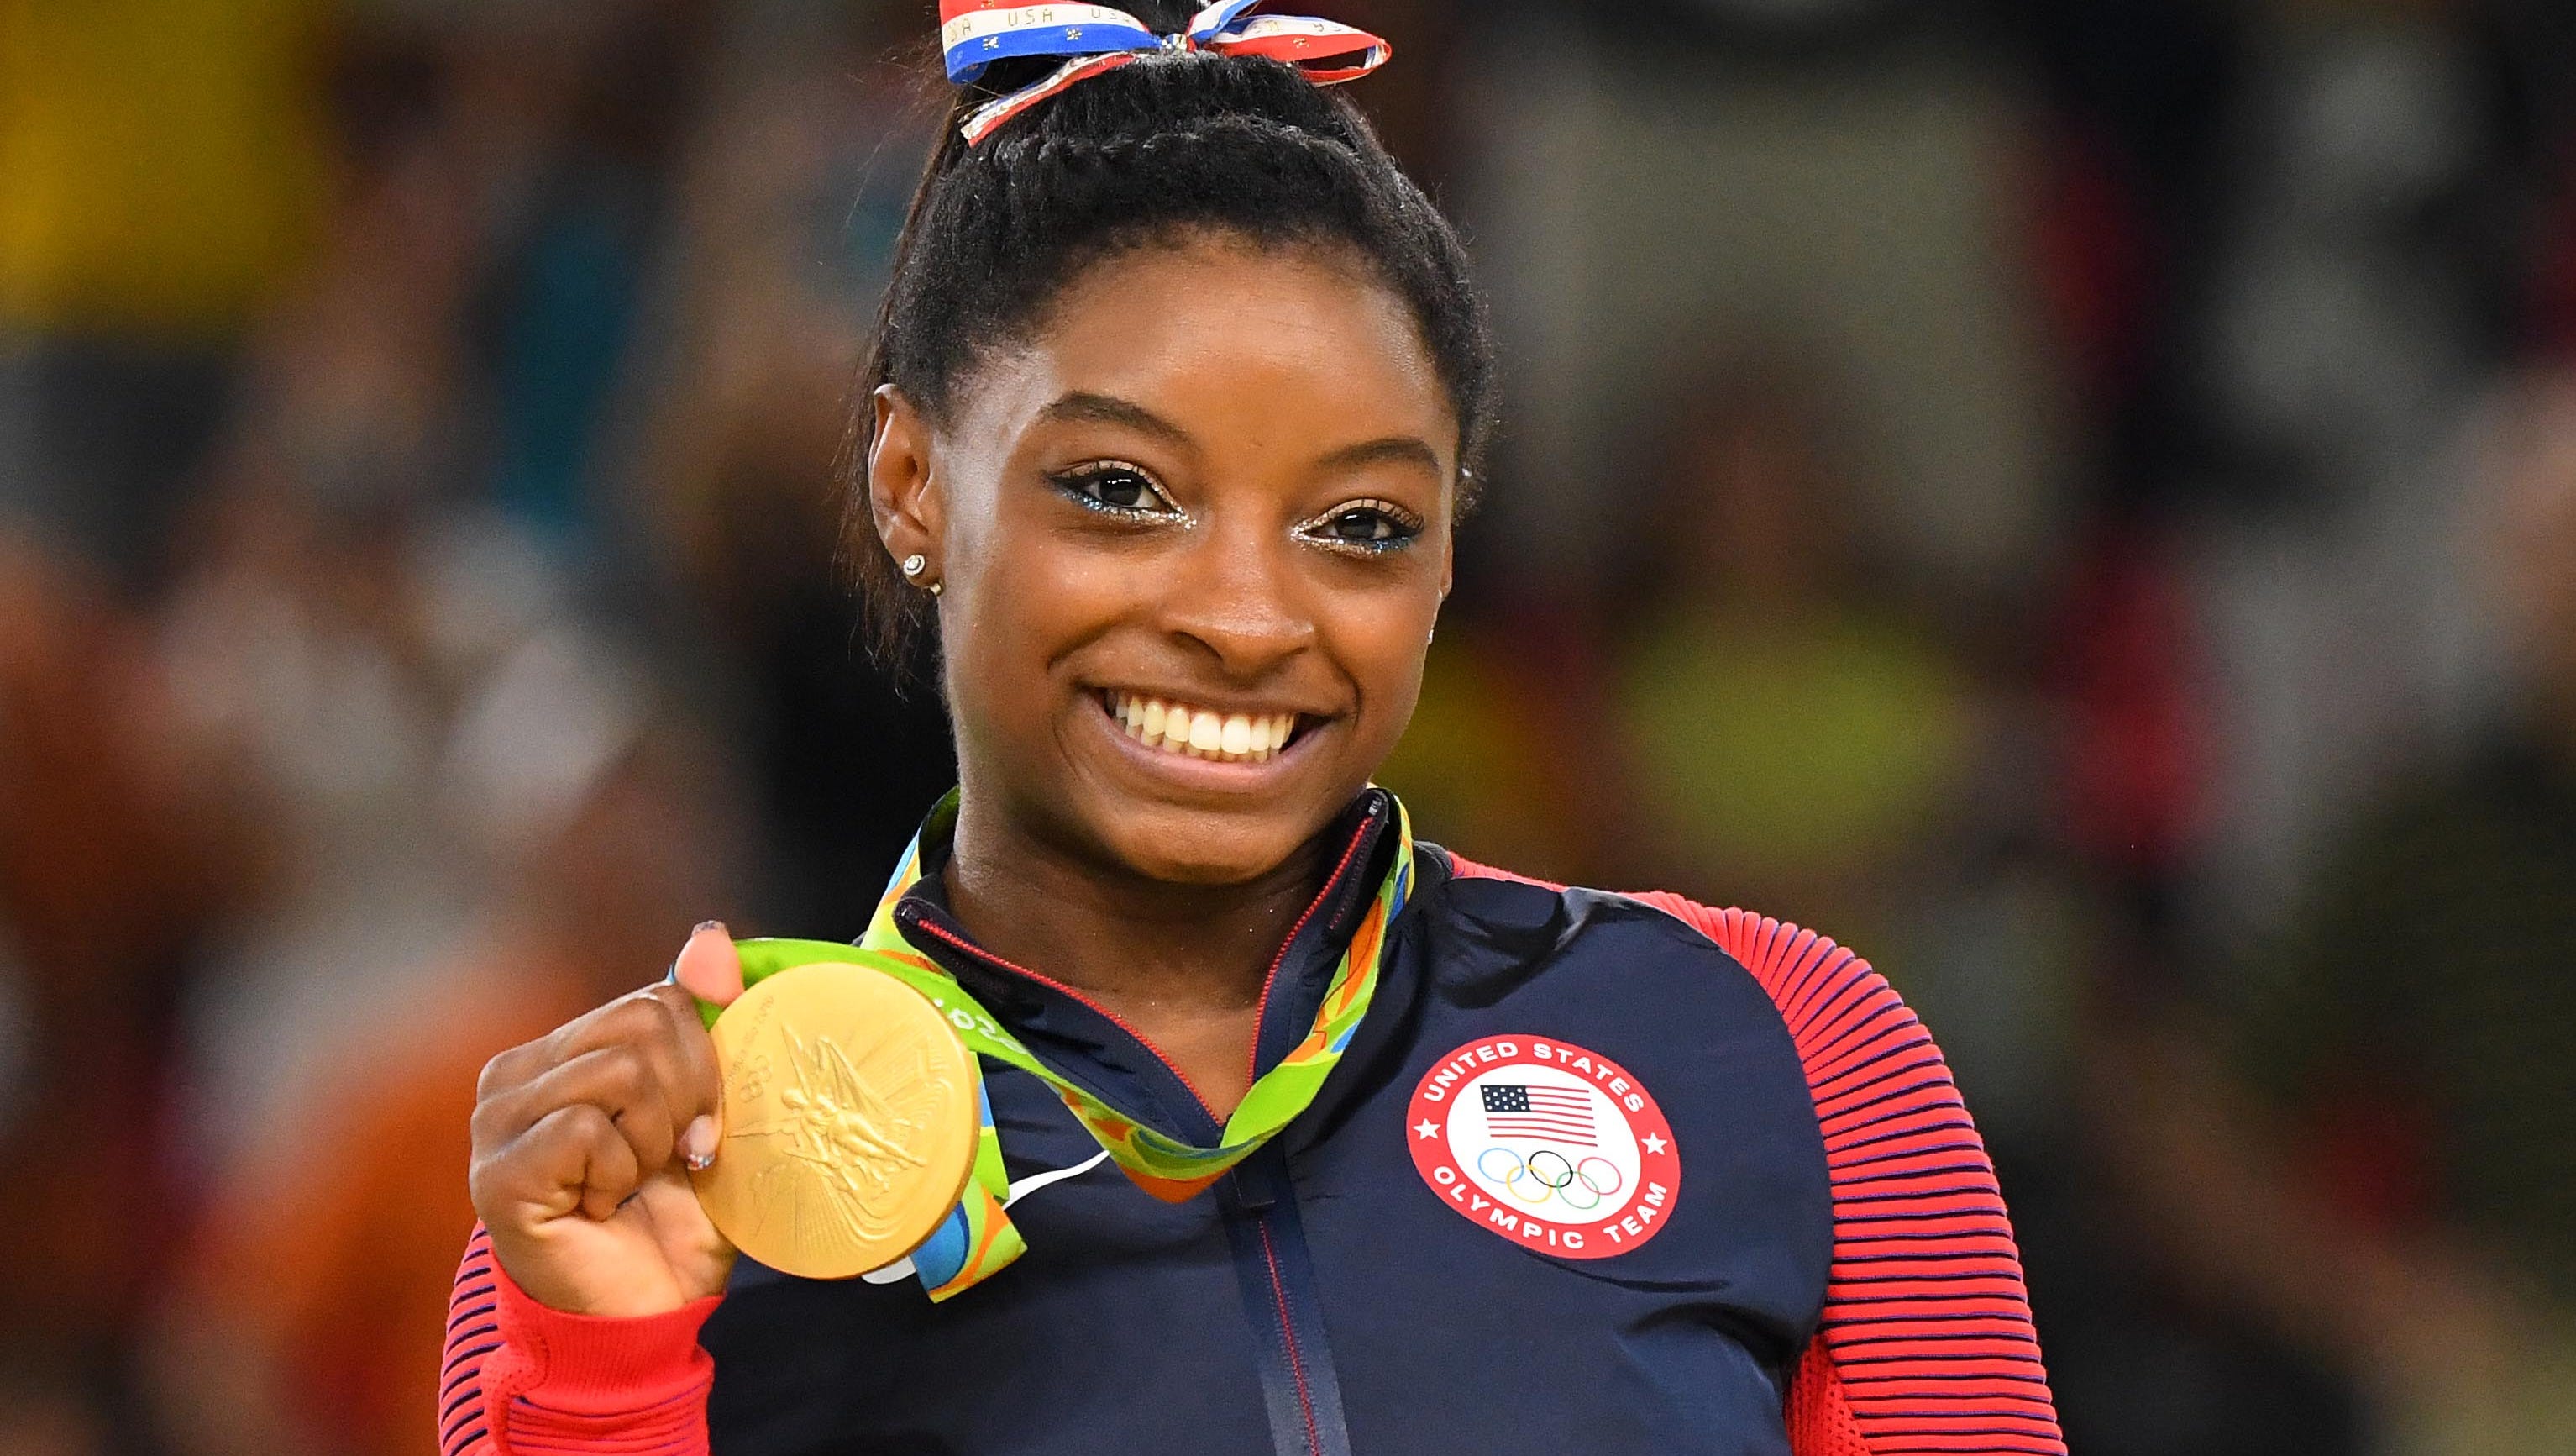 Simone Biles to compete on July 28 for first time since Rio Olympics